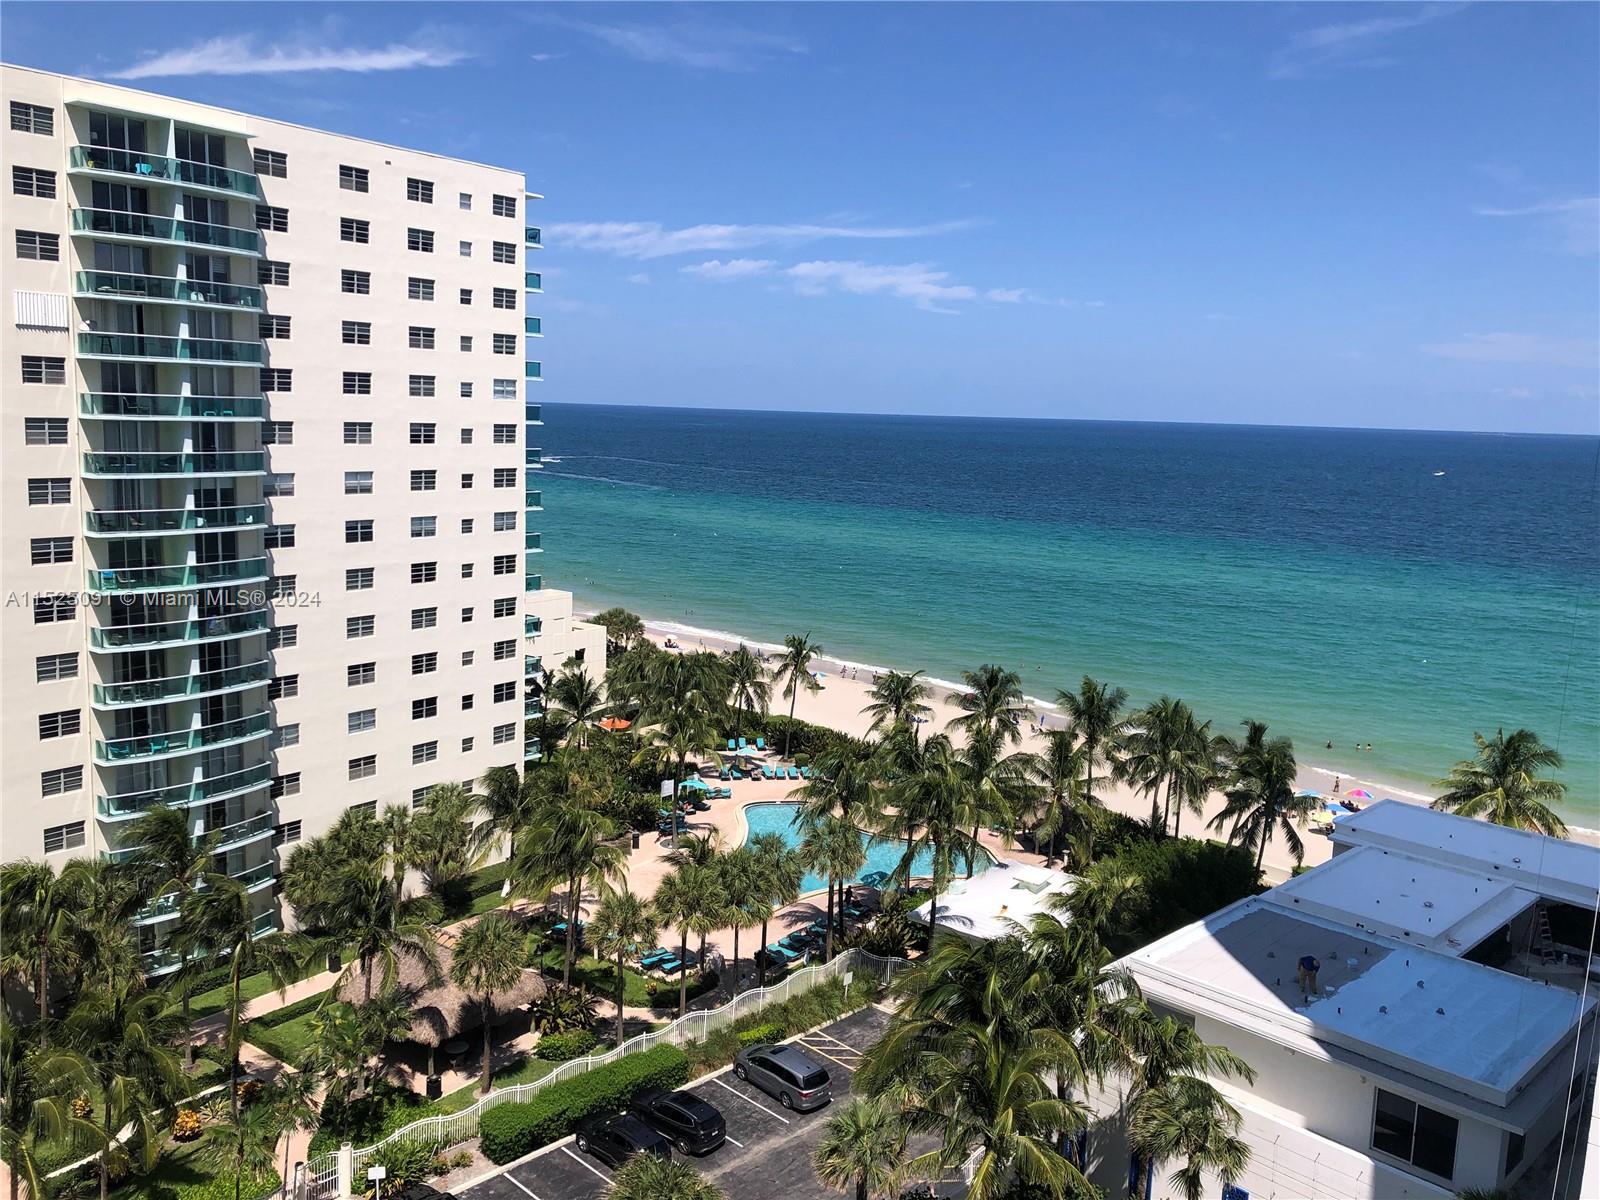 3901 S Ocean Dr 2B, Hollywood, Florida 33019, 1 Bedroom Bedrooms, ,1 BathroomBathrooms,Residentiallease,For Rent,3901 S Ocean Dr 2B,A11525091